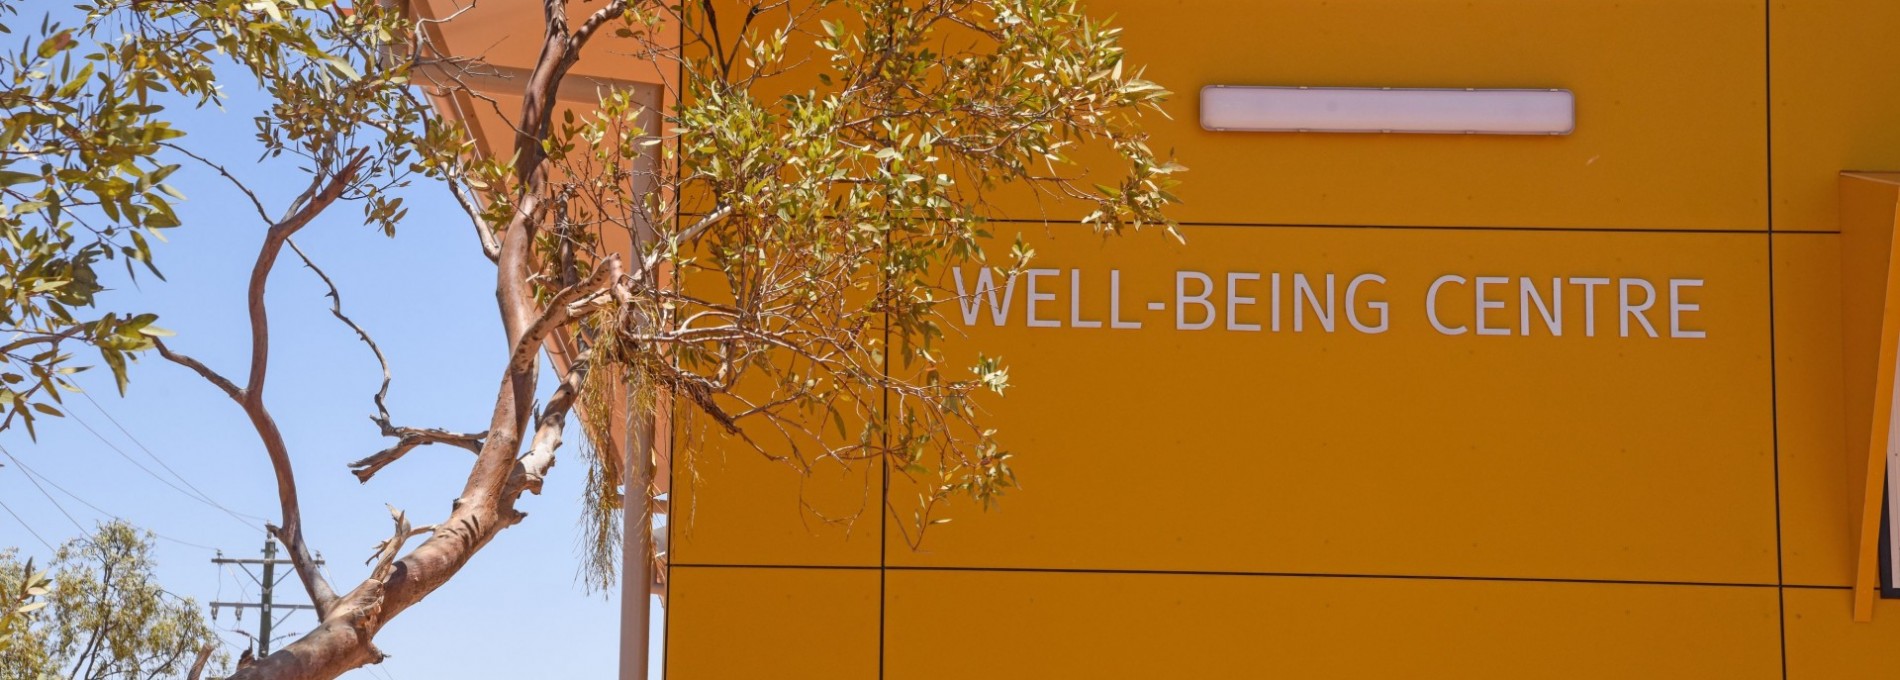 Exterior of Orange Modular Building with "Wellness Centre" on the Wall